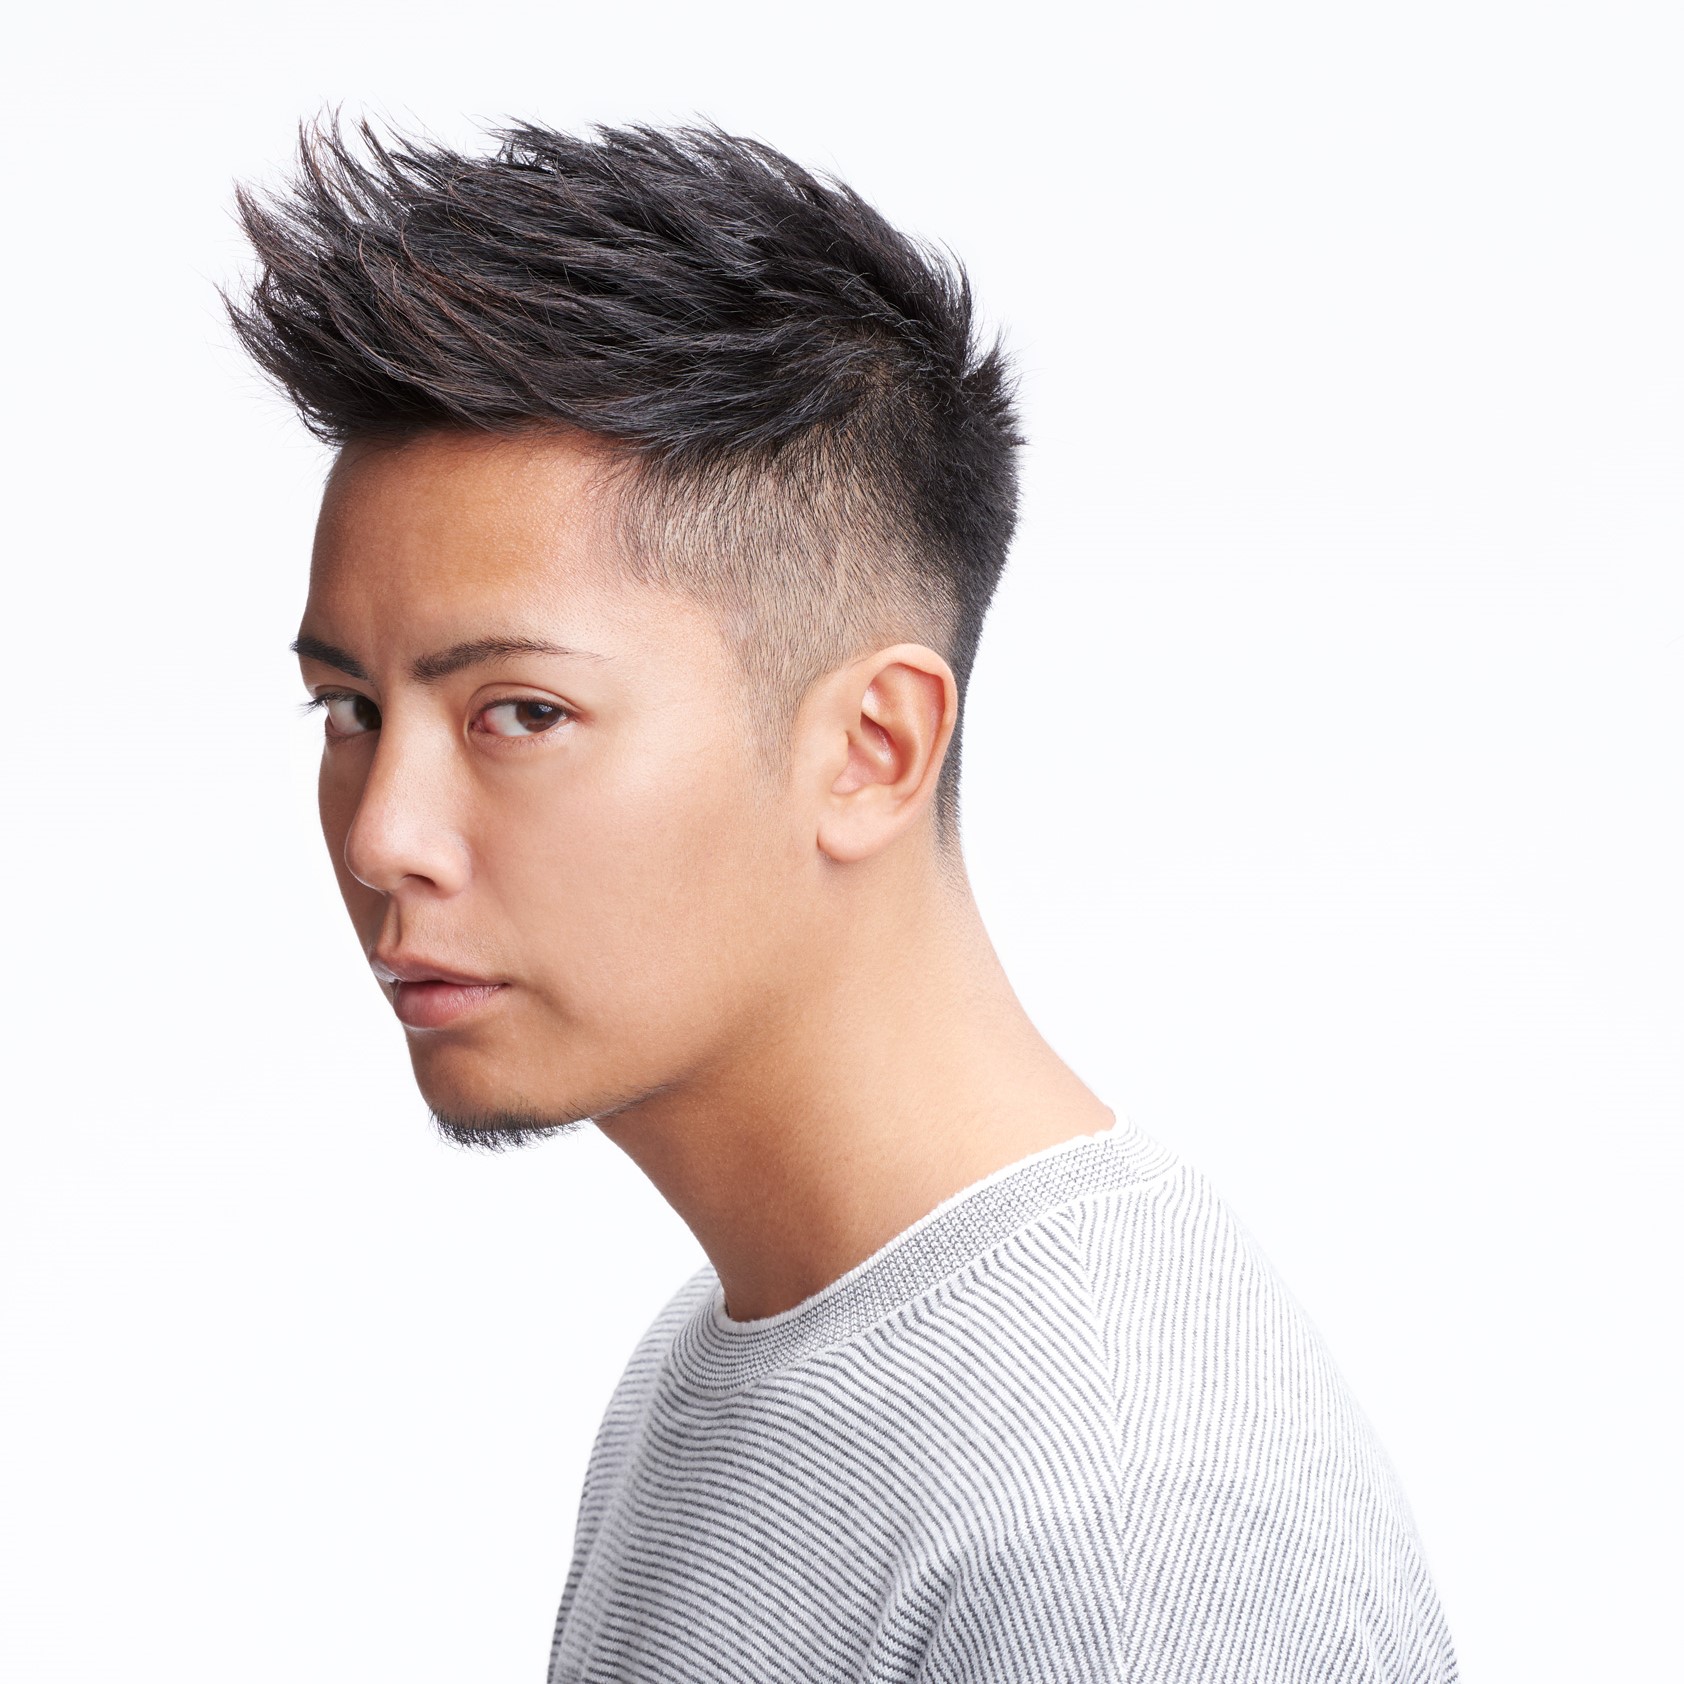 How to Style Asian Male Hair: 21 Hairstyles & Styling Tips